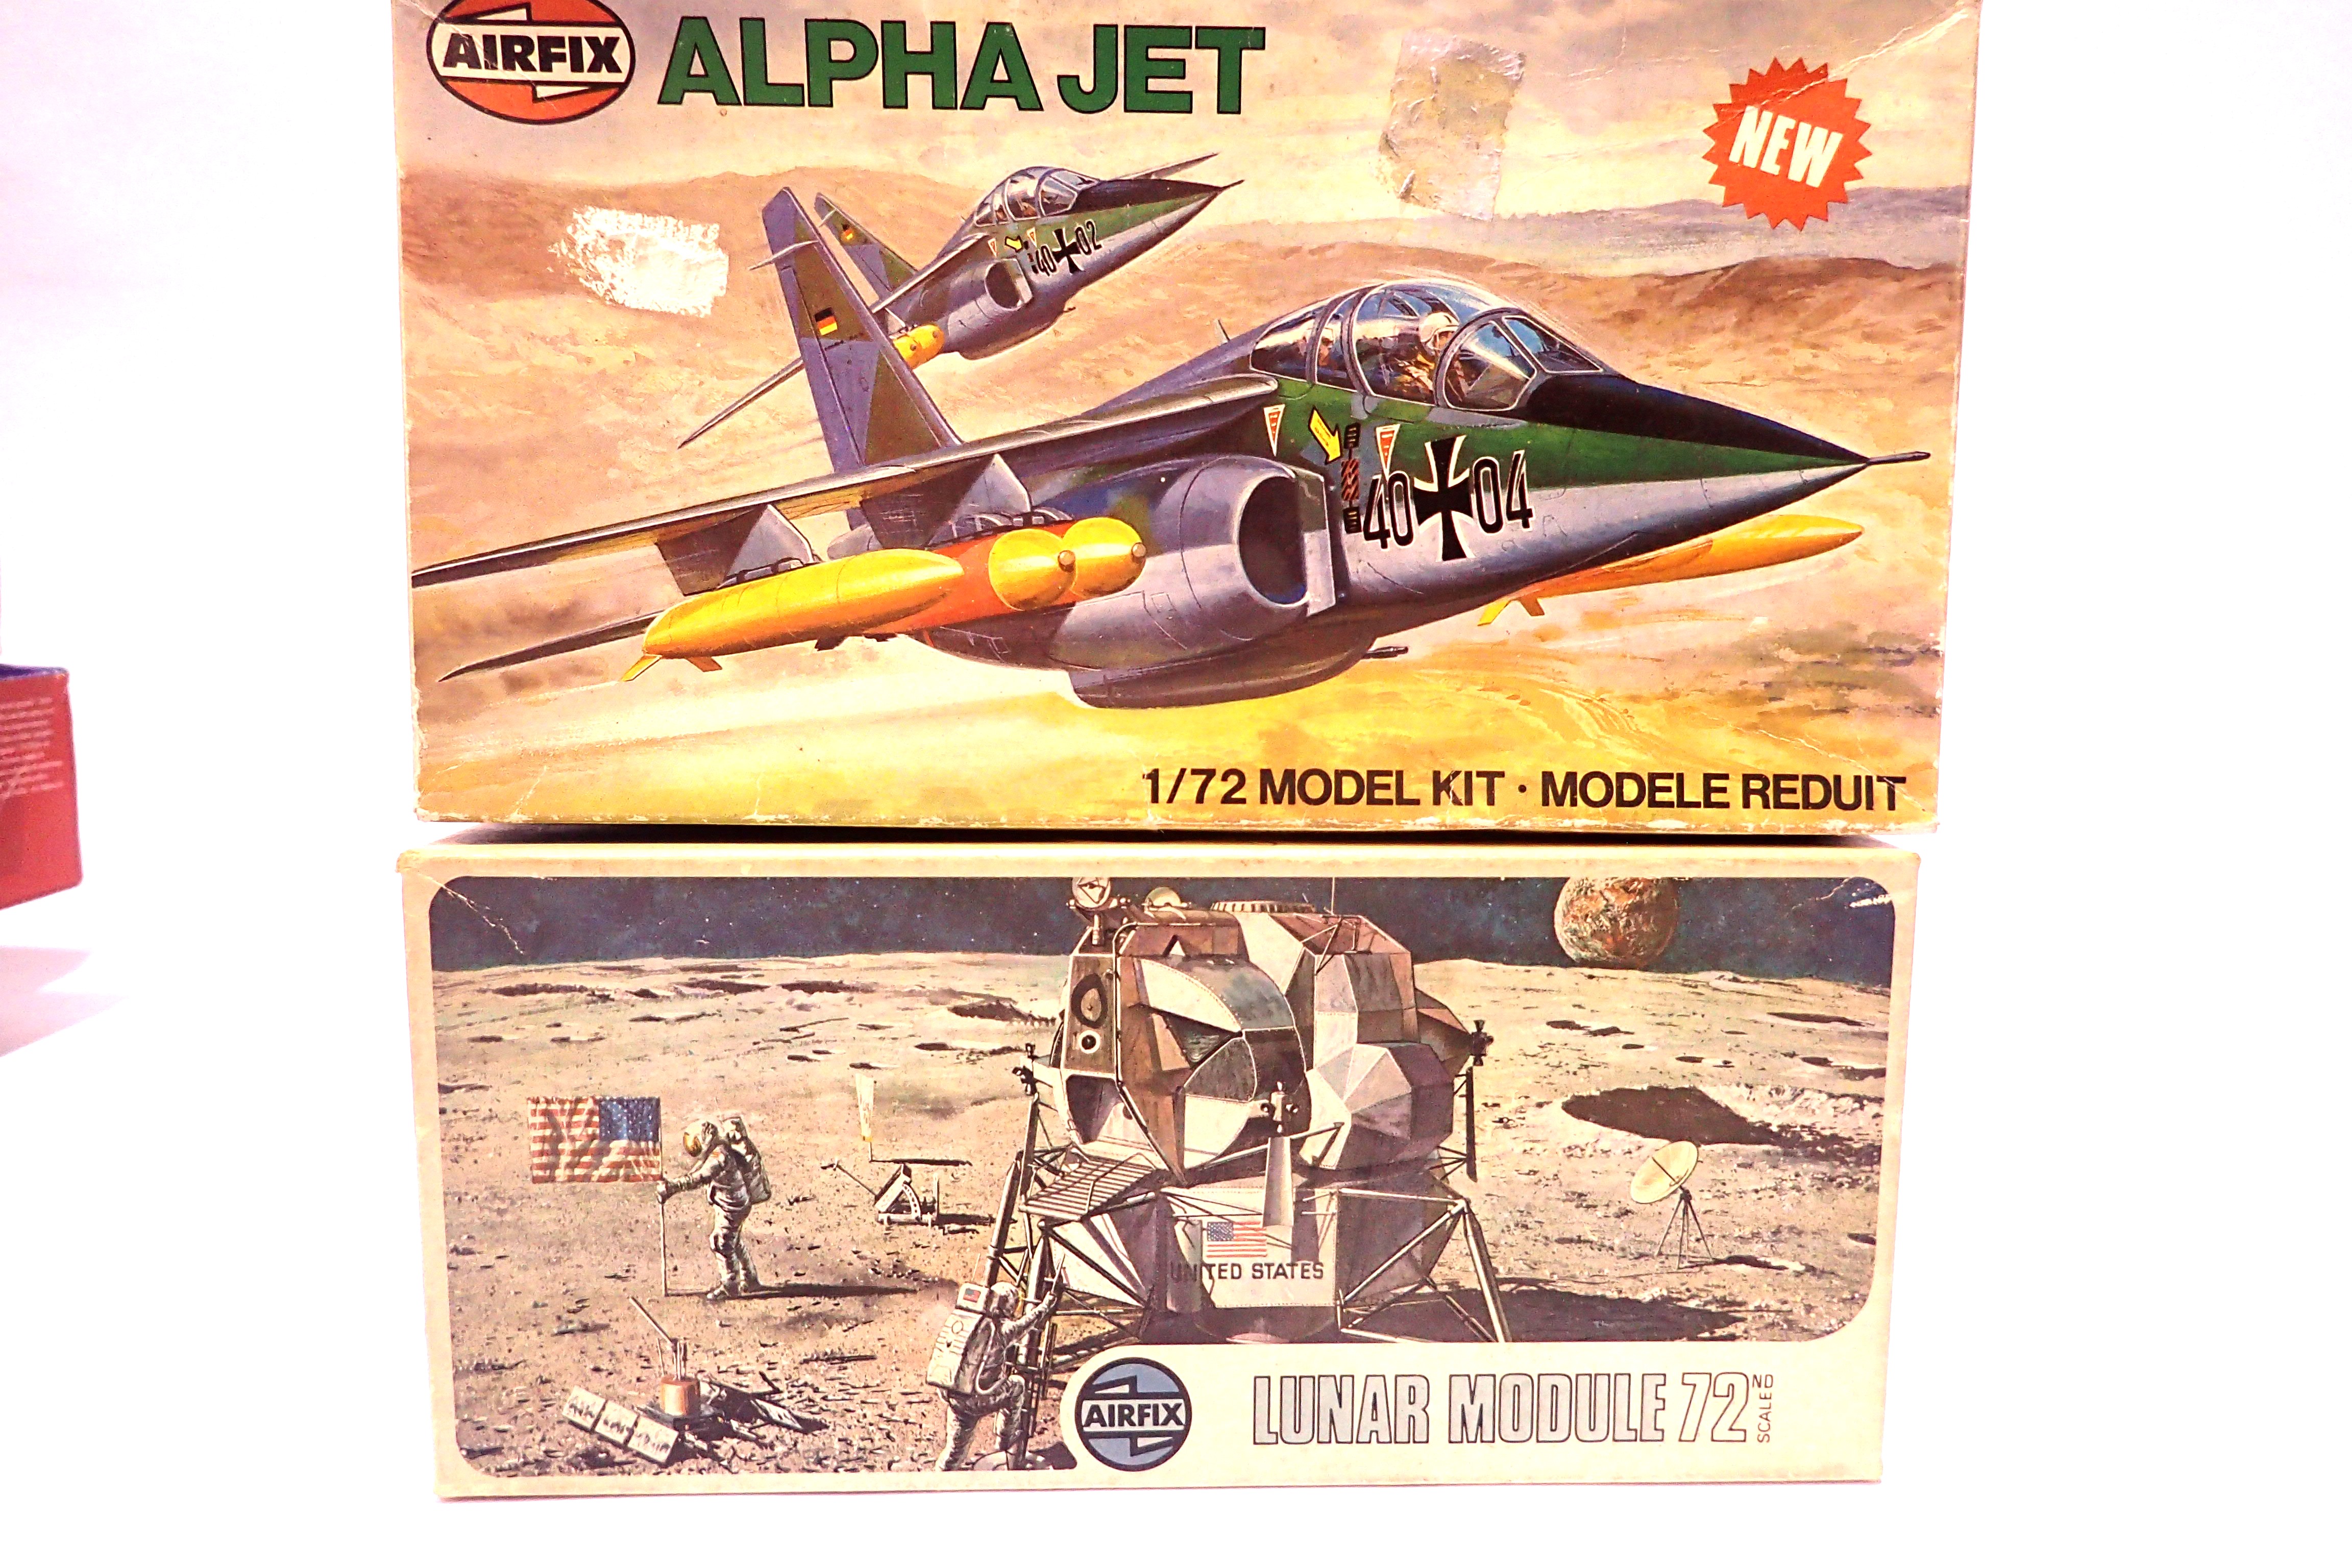 Two Airfix kits 1/72 scale, Lunar module and alpha jet. P&P Group 1 (£14+VAT for the first lot